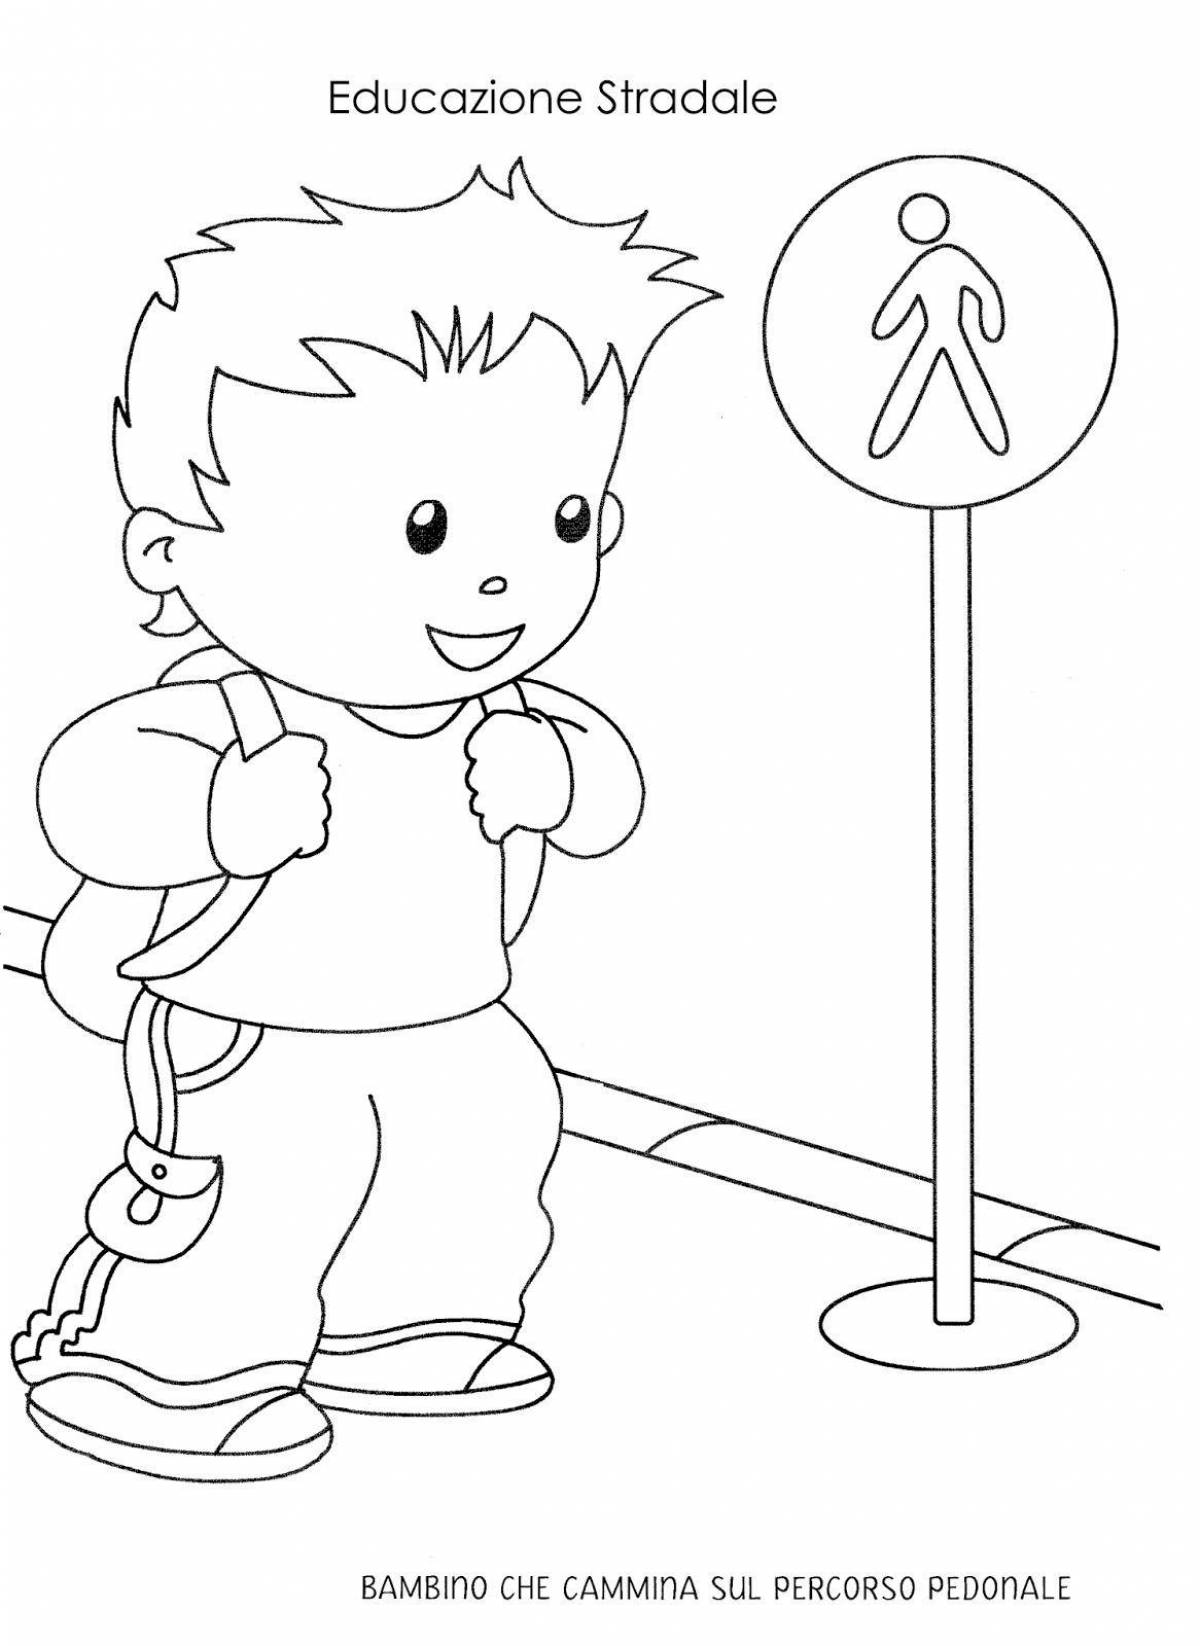 According to traffic rules for preschoolers preparatory group #8